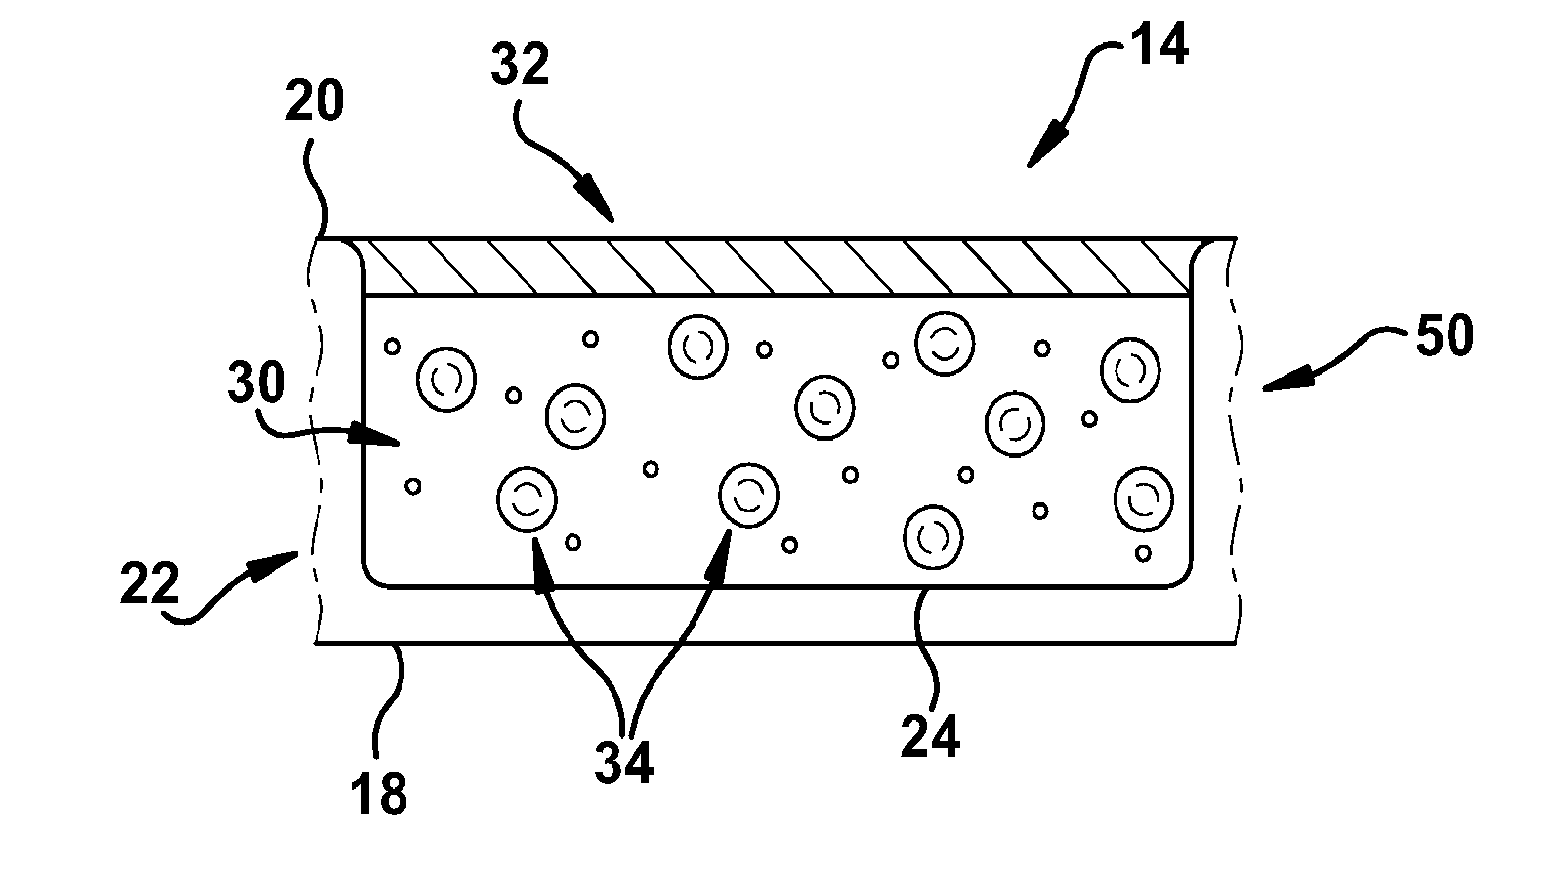 In vitro point-of-care sensor and method of use